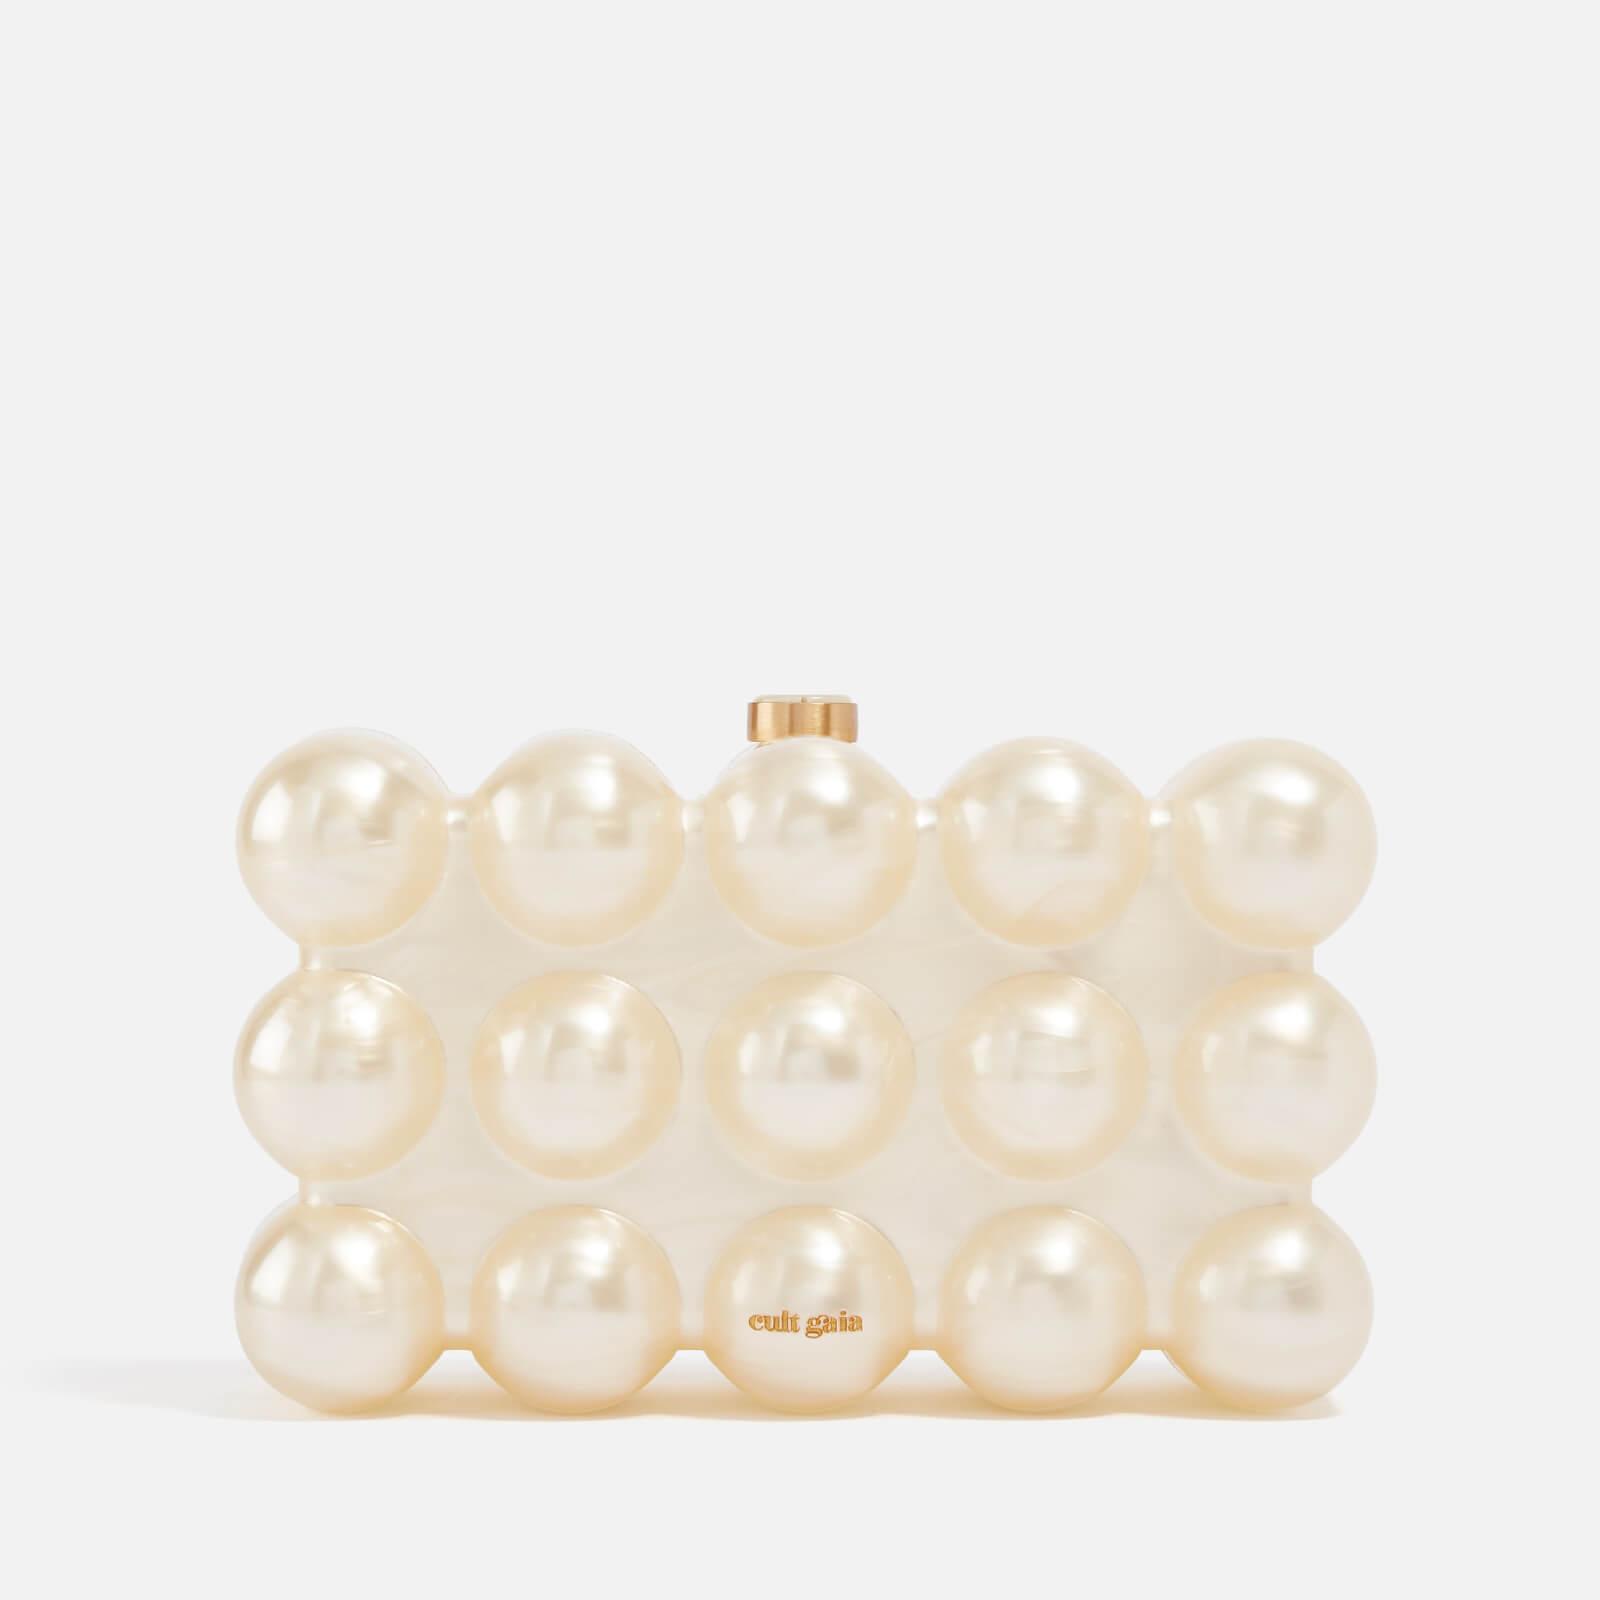 Cult Gaia The Bubble Acrylic Clutch Bag in Natural | Lyst UK